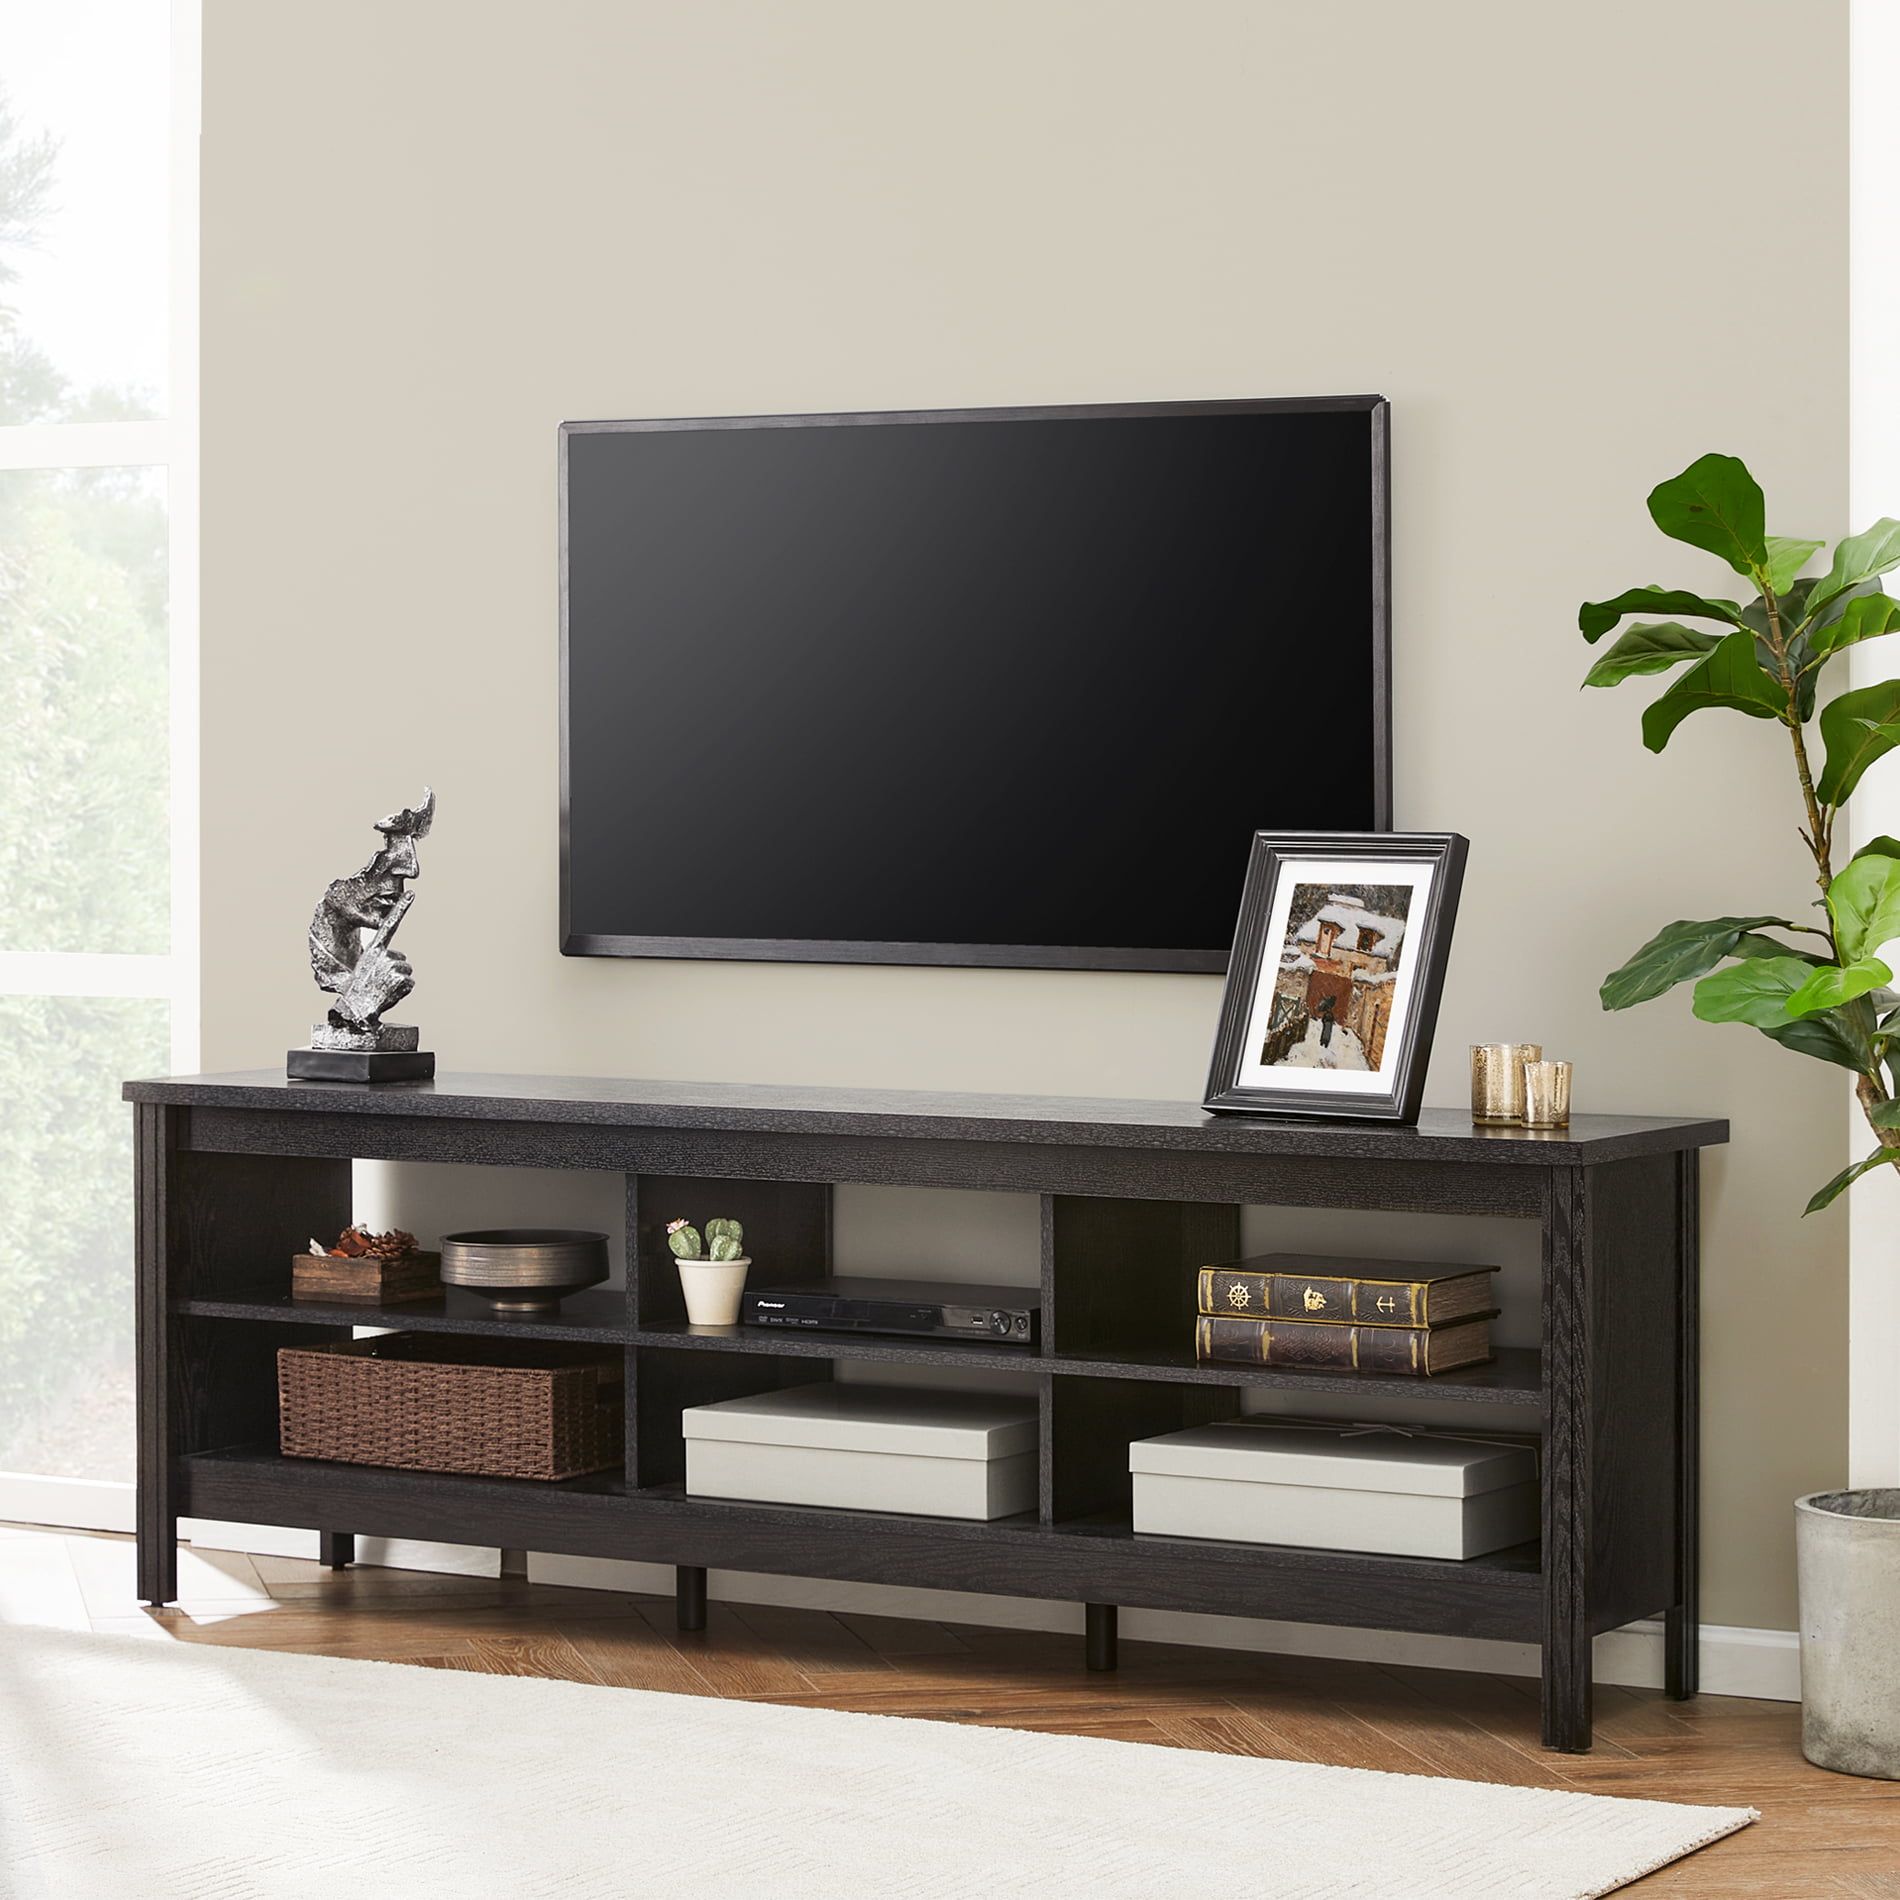 Farmhouse Tv Stands For 75 Inch Flat Screen Media Console Storage Intended For Media Entertainment Center Tv Stands (Gallery 4 of 20)